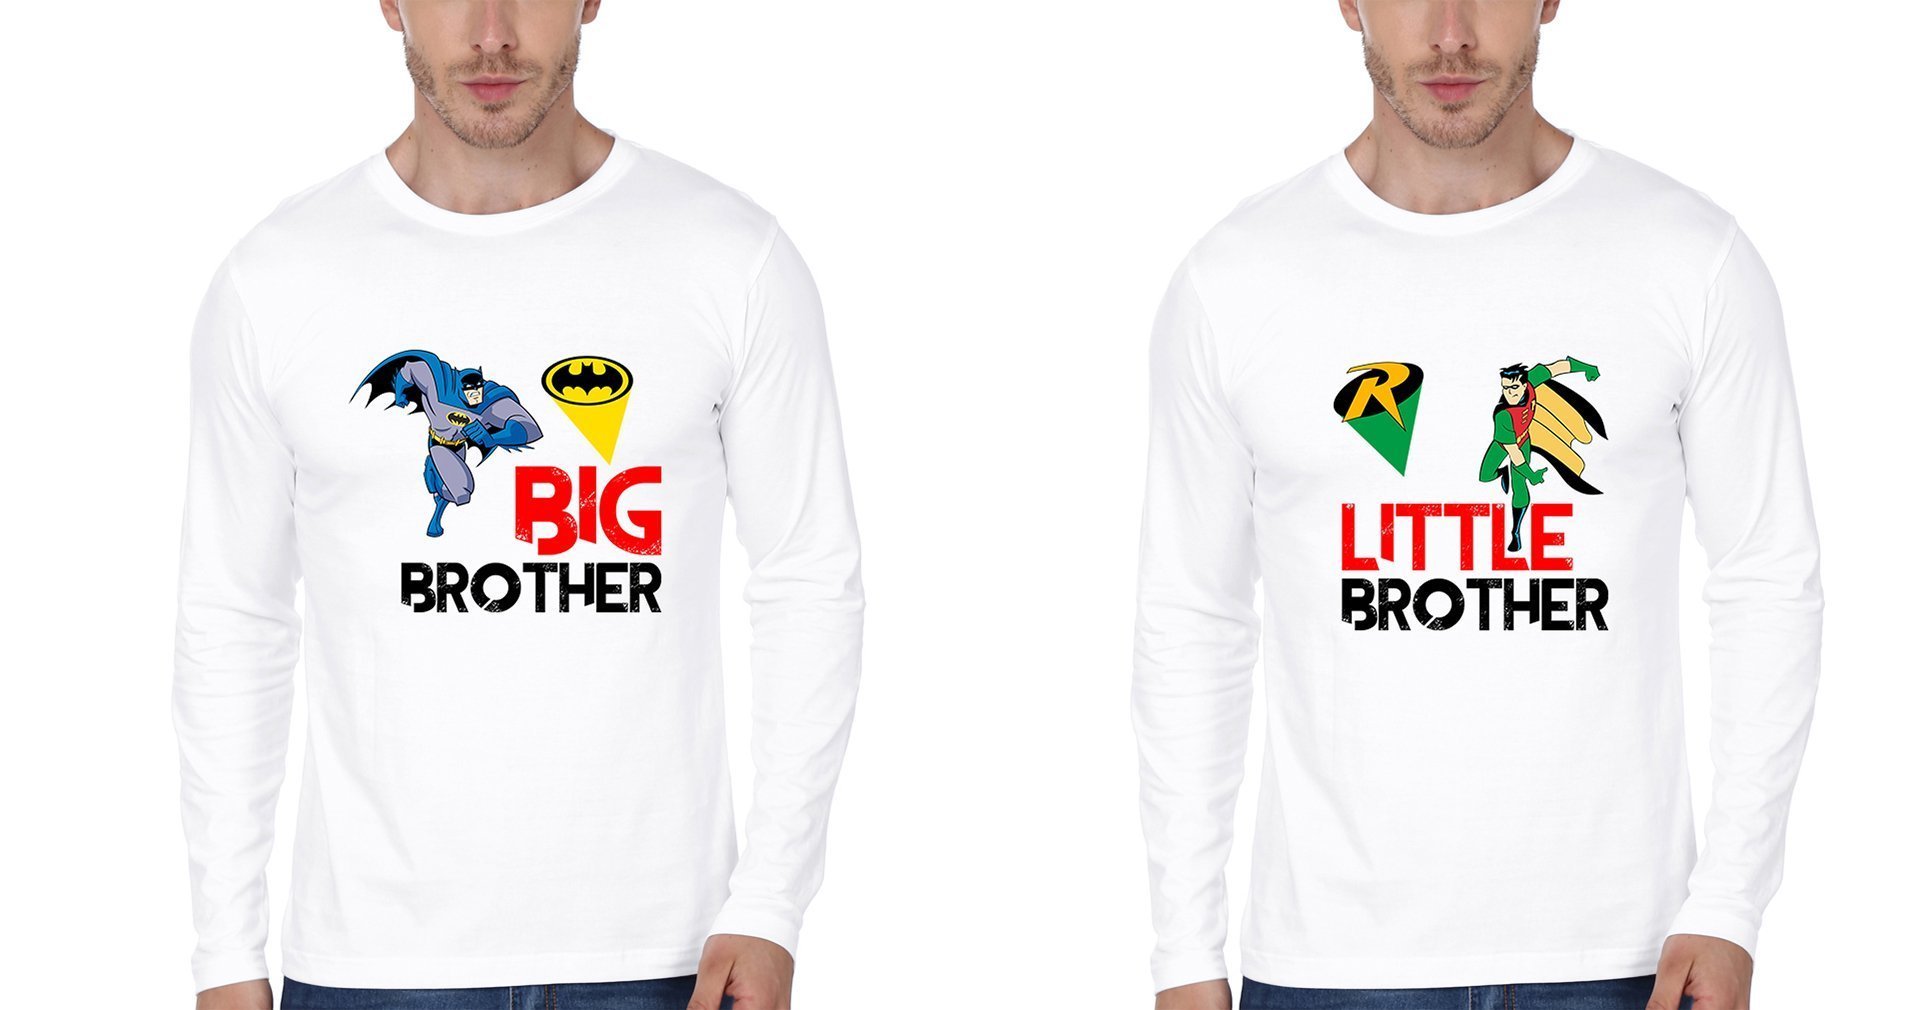 Big Brother Little Brother-Brother Full Sleeves T-Shirts -FunkyTees - Funky Tees Club